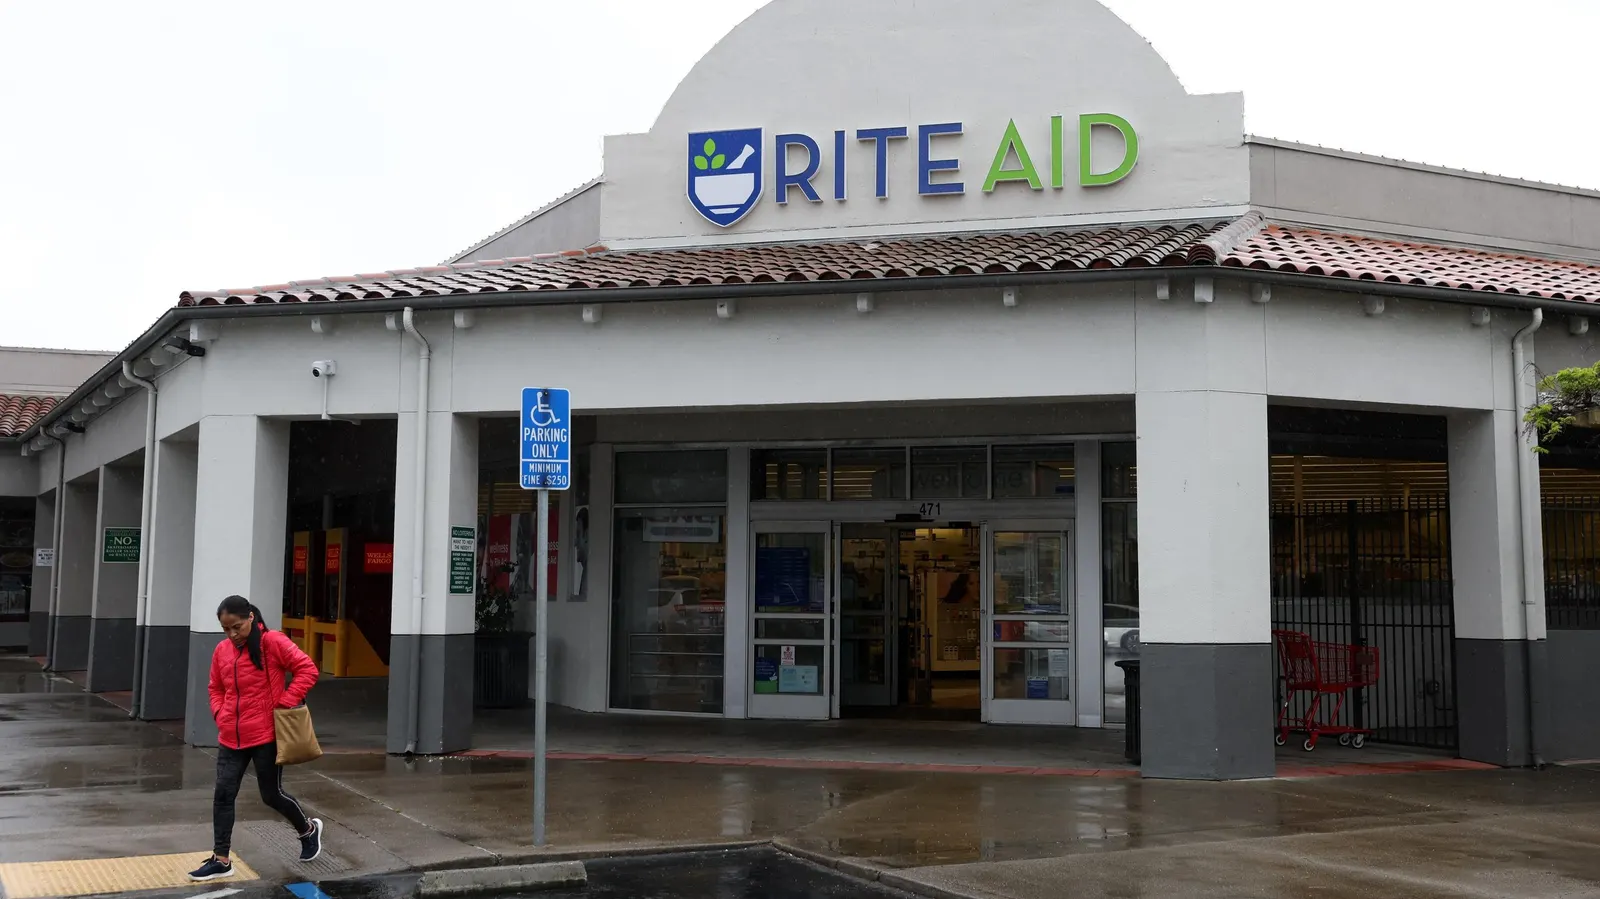 Rite Aid Bankruptcy Update: How the Famous Pharmacy Chain is Fighting to Survive Amidst Store Closures and Debt Woes